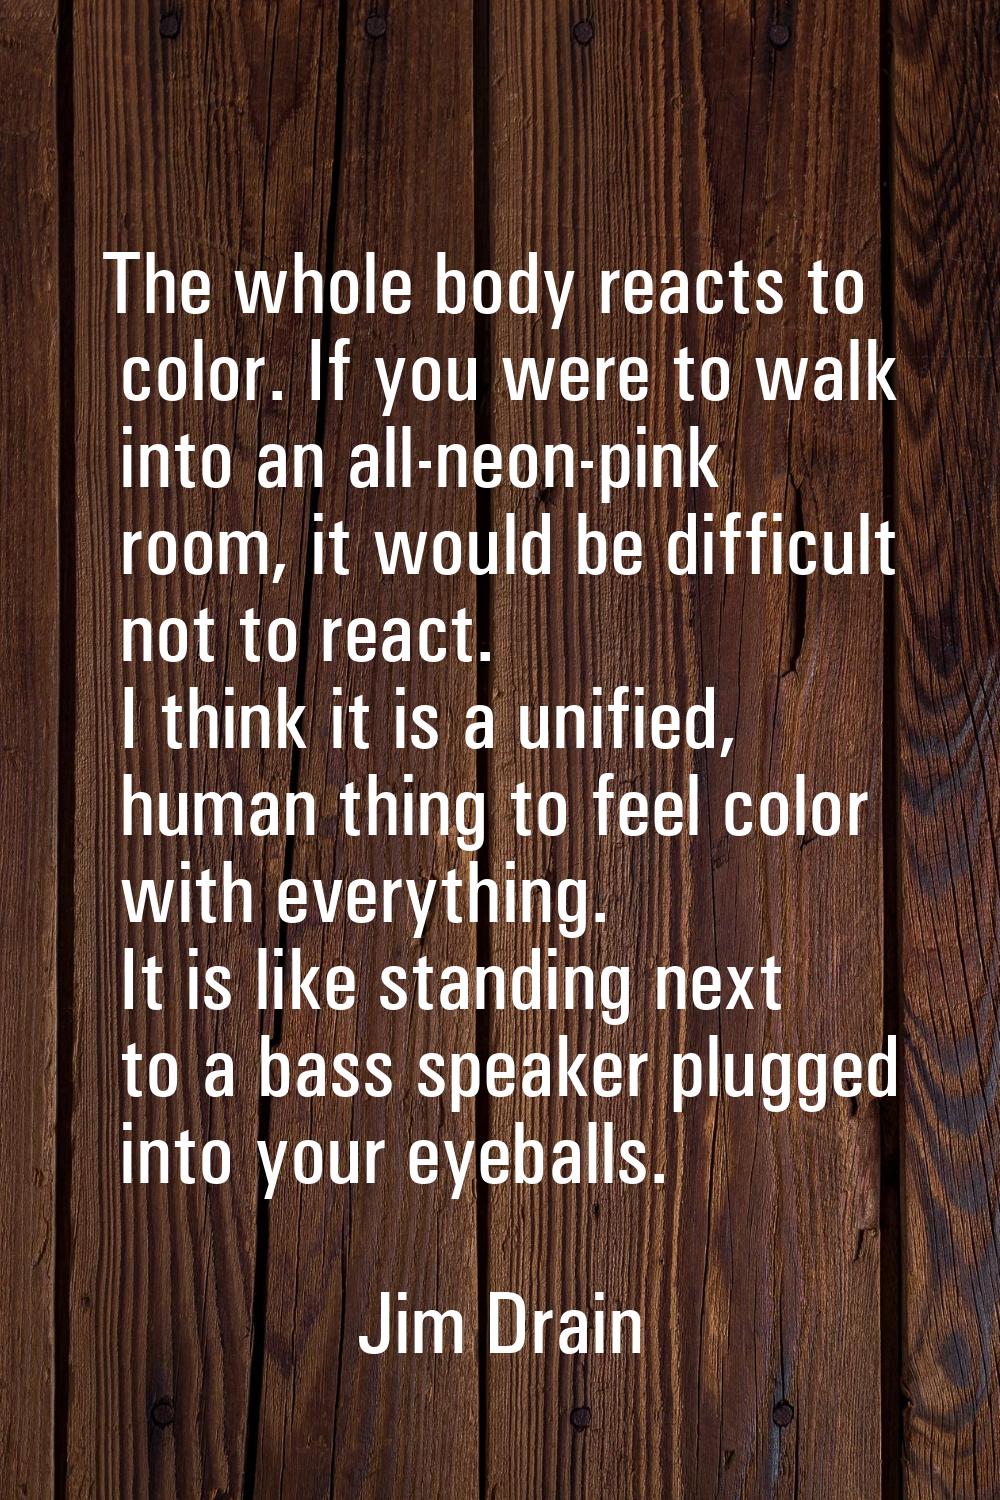 The whole body reacts to color. If you were to walk into an all-neon-pink room, it would be difficu